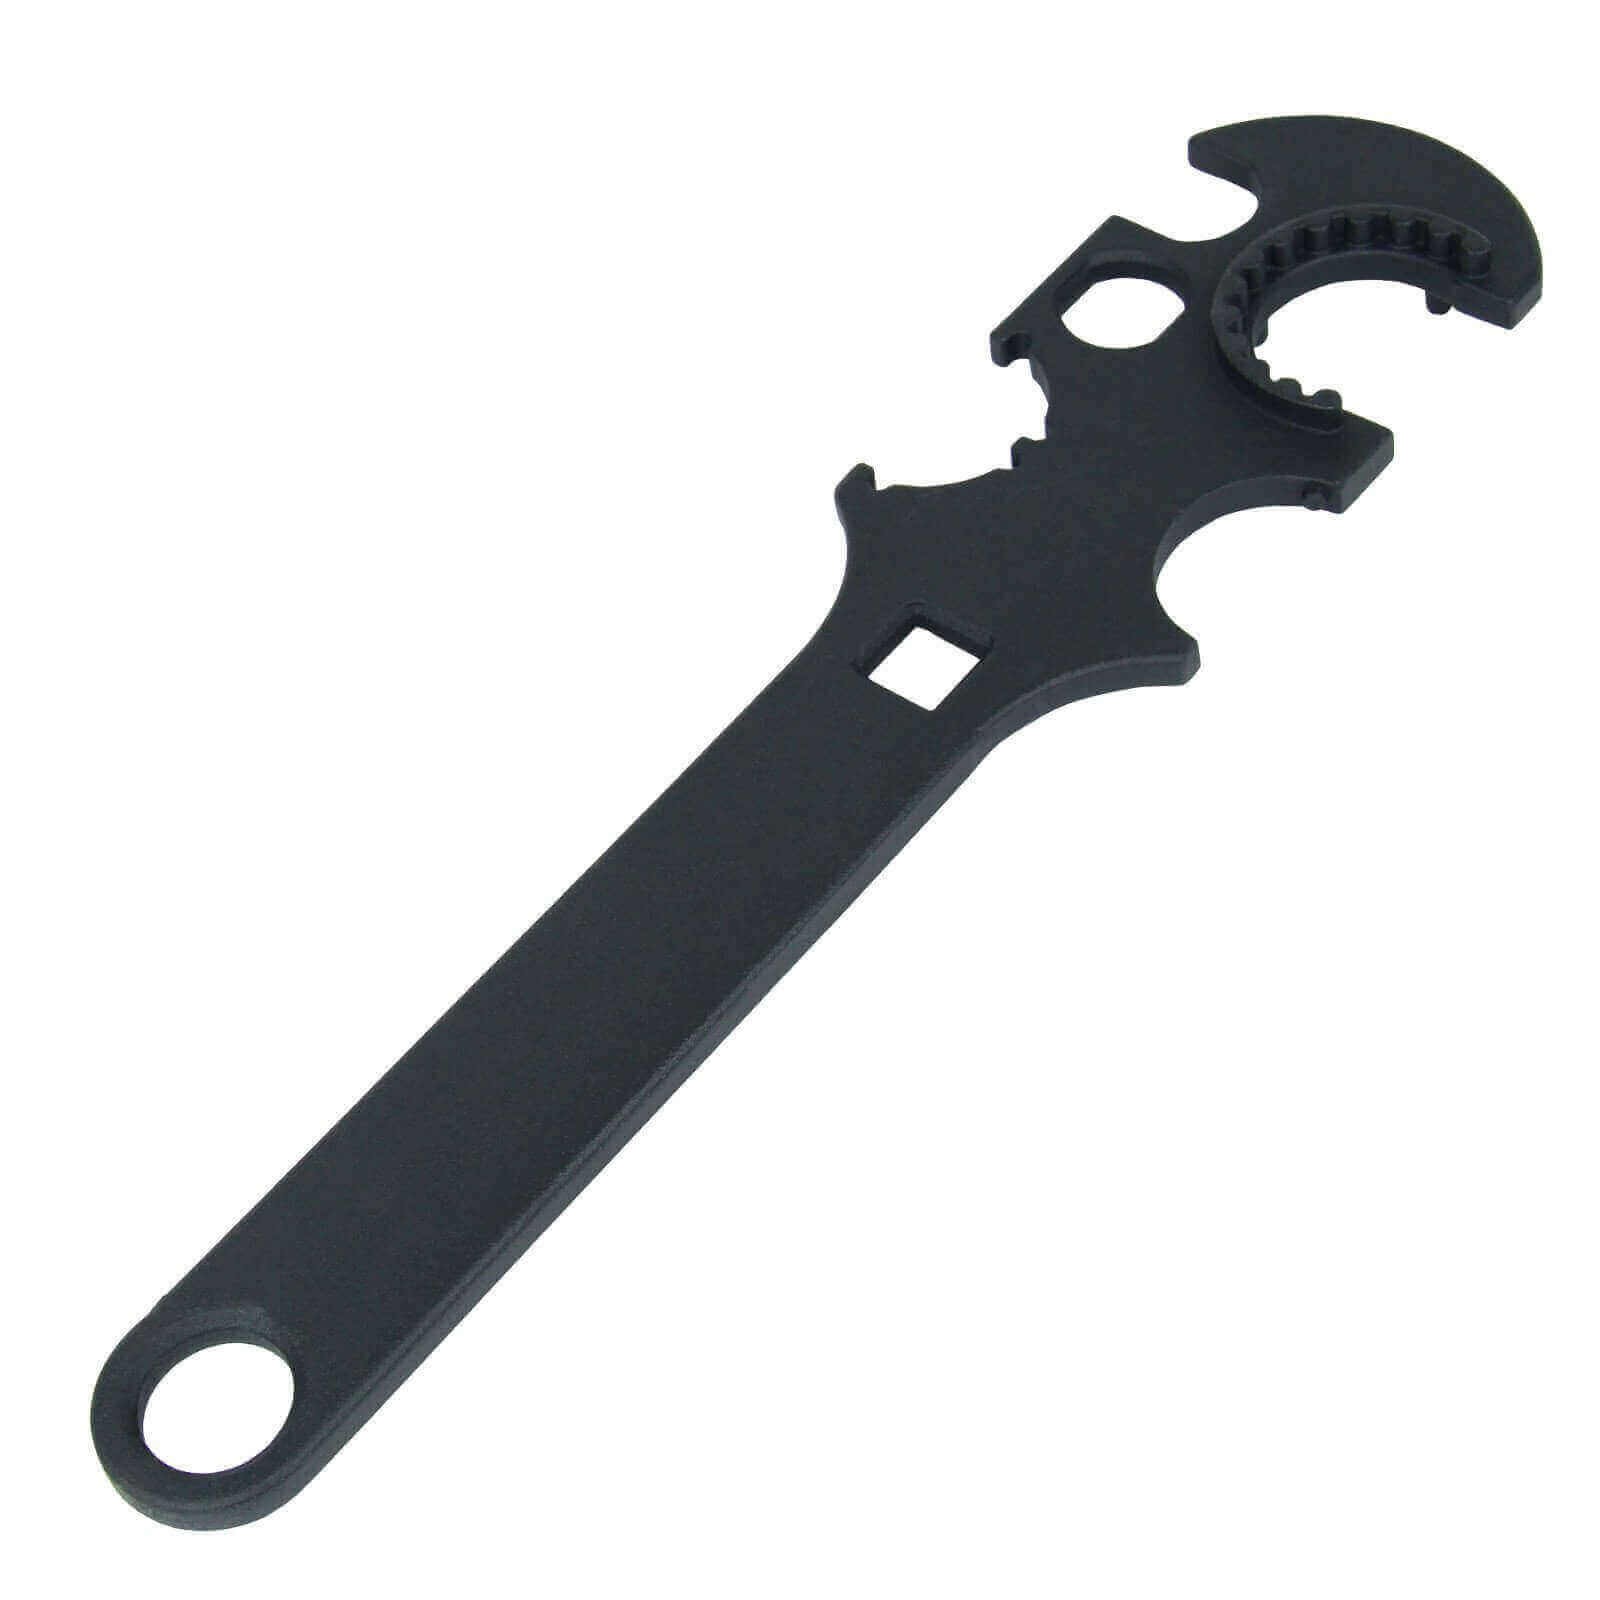 Armorer’s Wrench for AR-15 Multi-Fuction Tool by AT3™